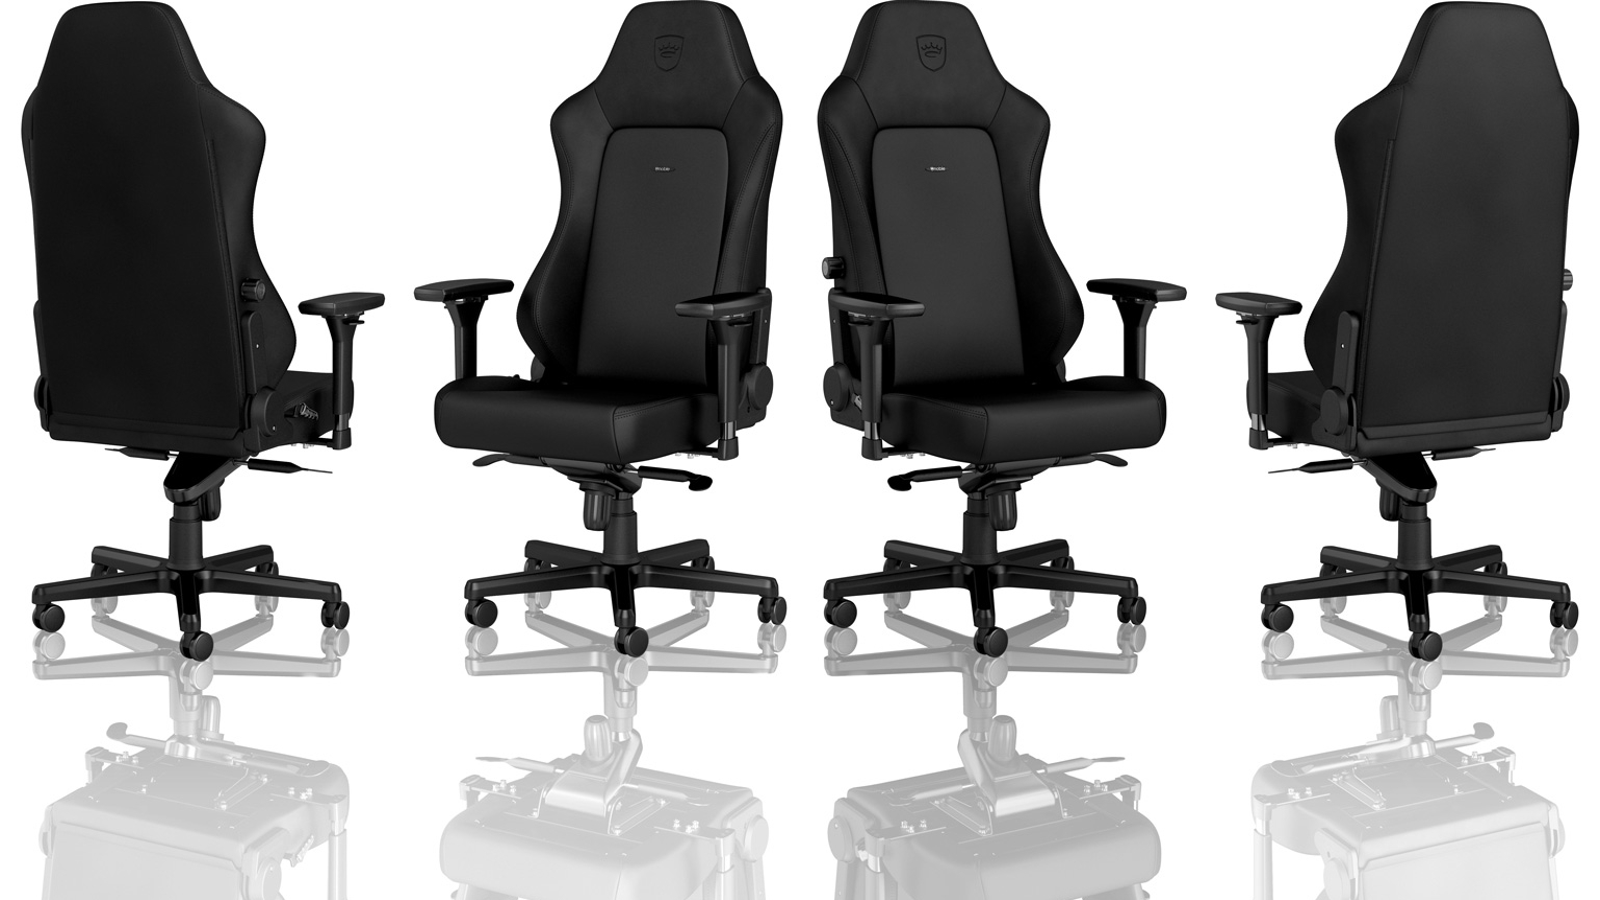 Noblechairs Hero Black Edition review: are gaming chairs worth it?